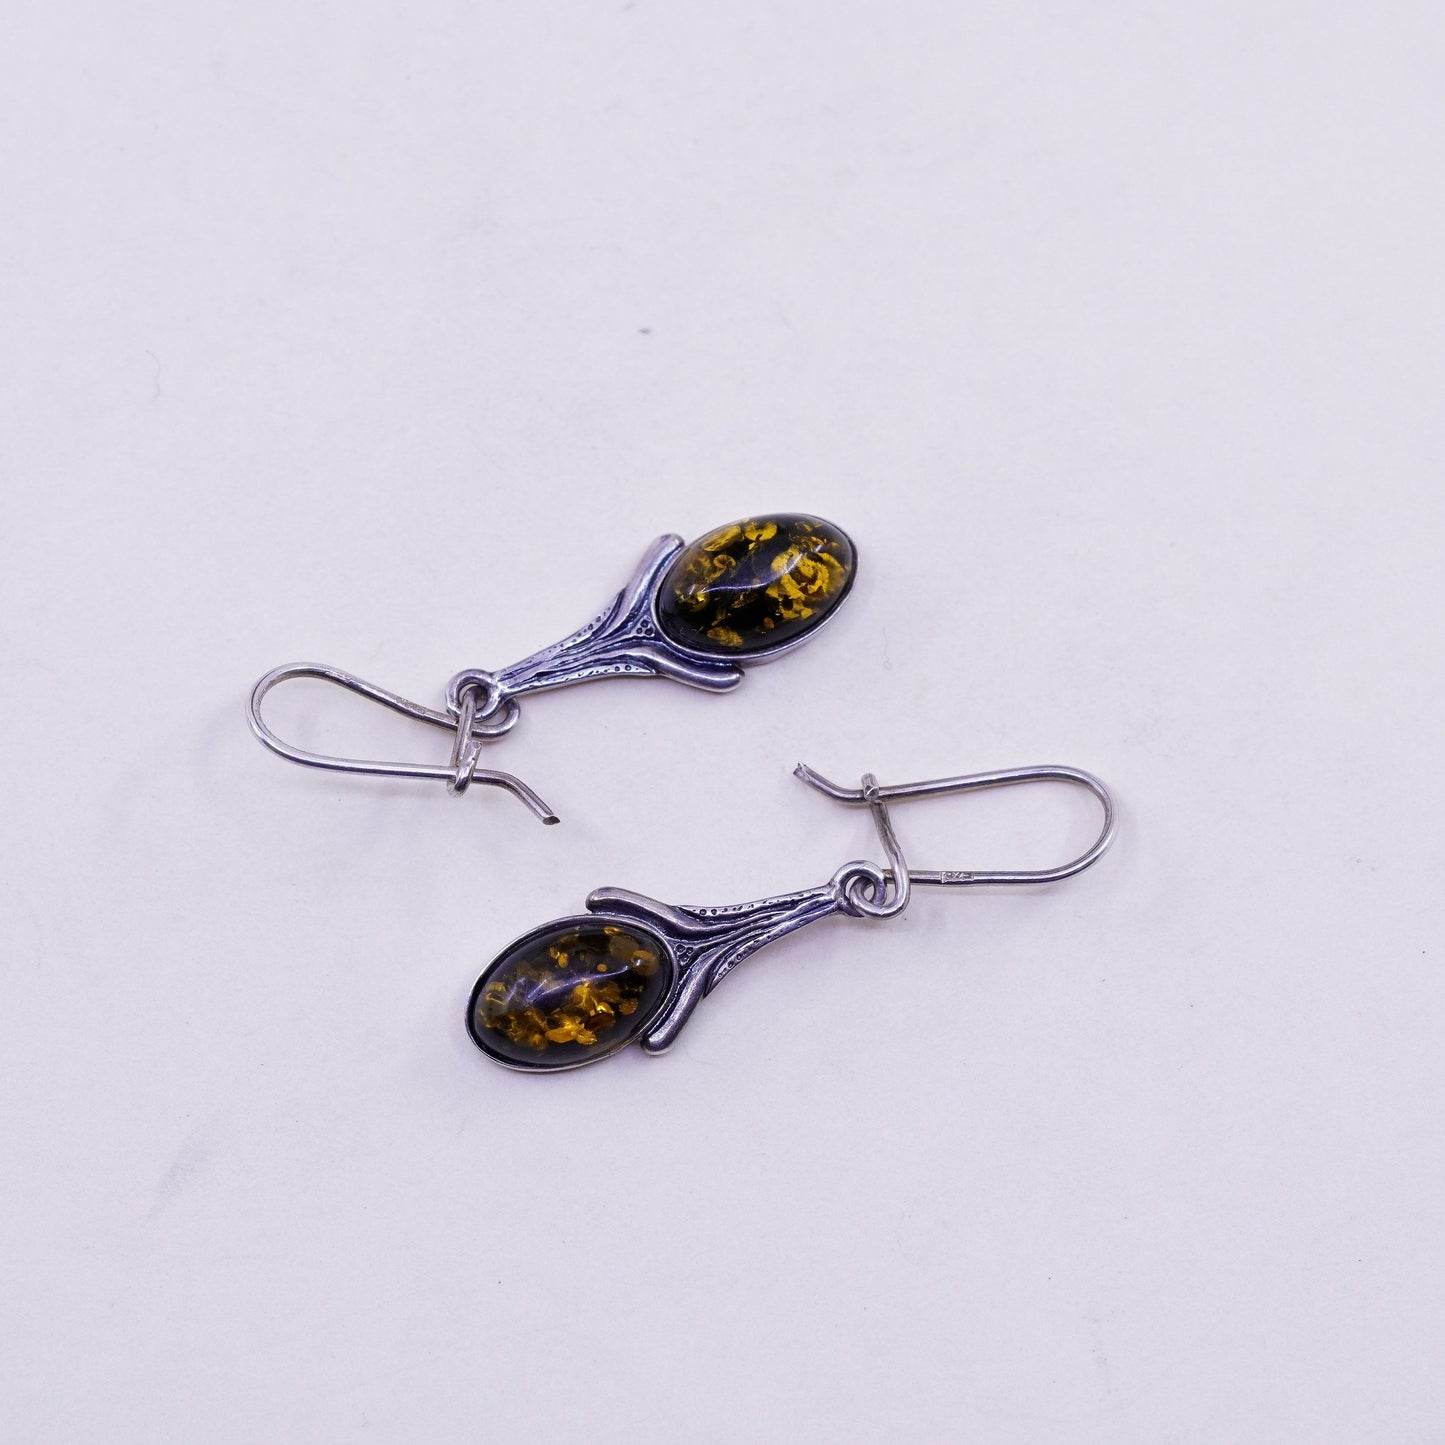 Vintage sterling 925 silver handmade earrings with oval Amber